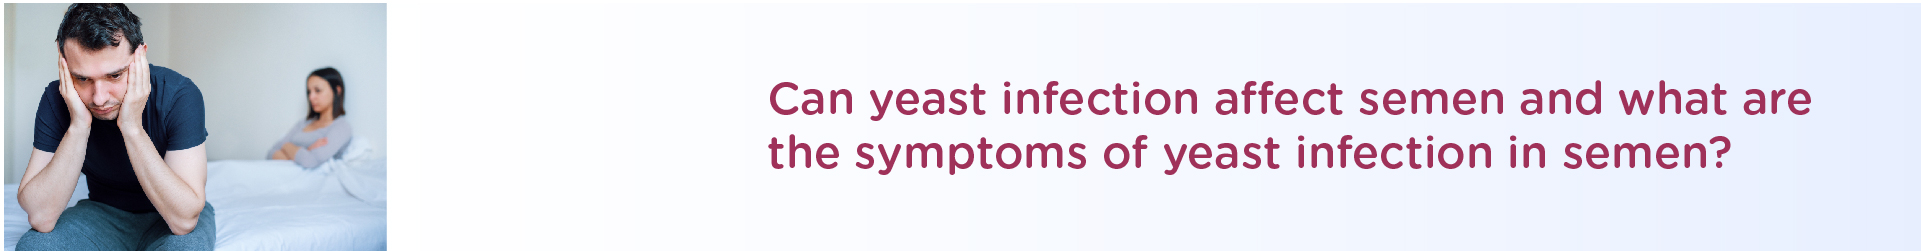 Can Yeast Infection Affect Semen and what are The Symptoms of Yeast Infection in Semen?